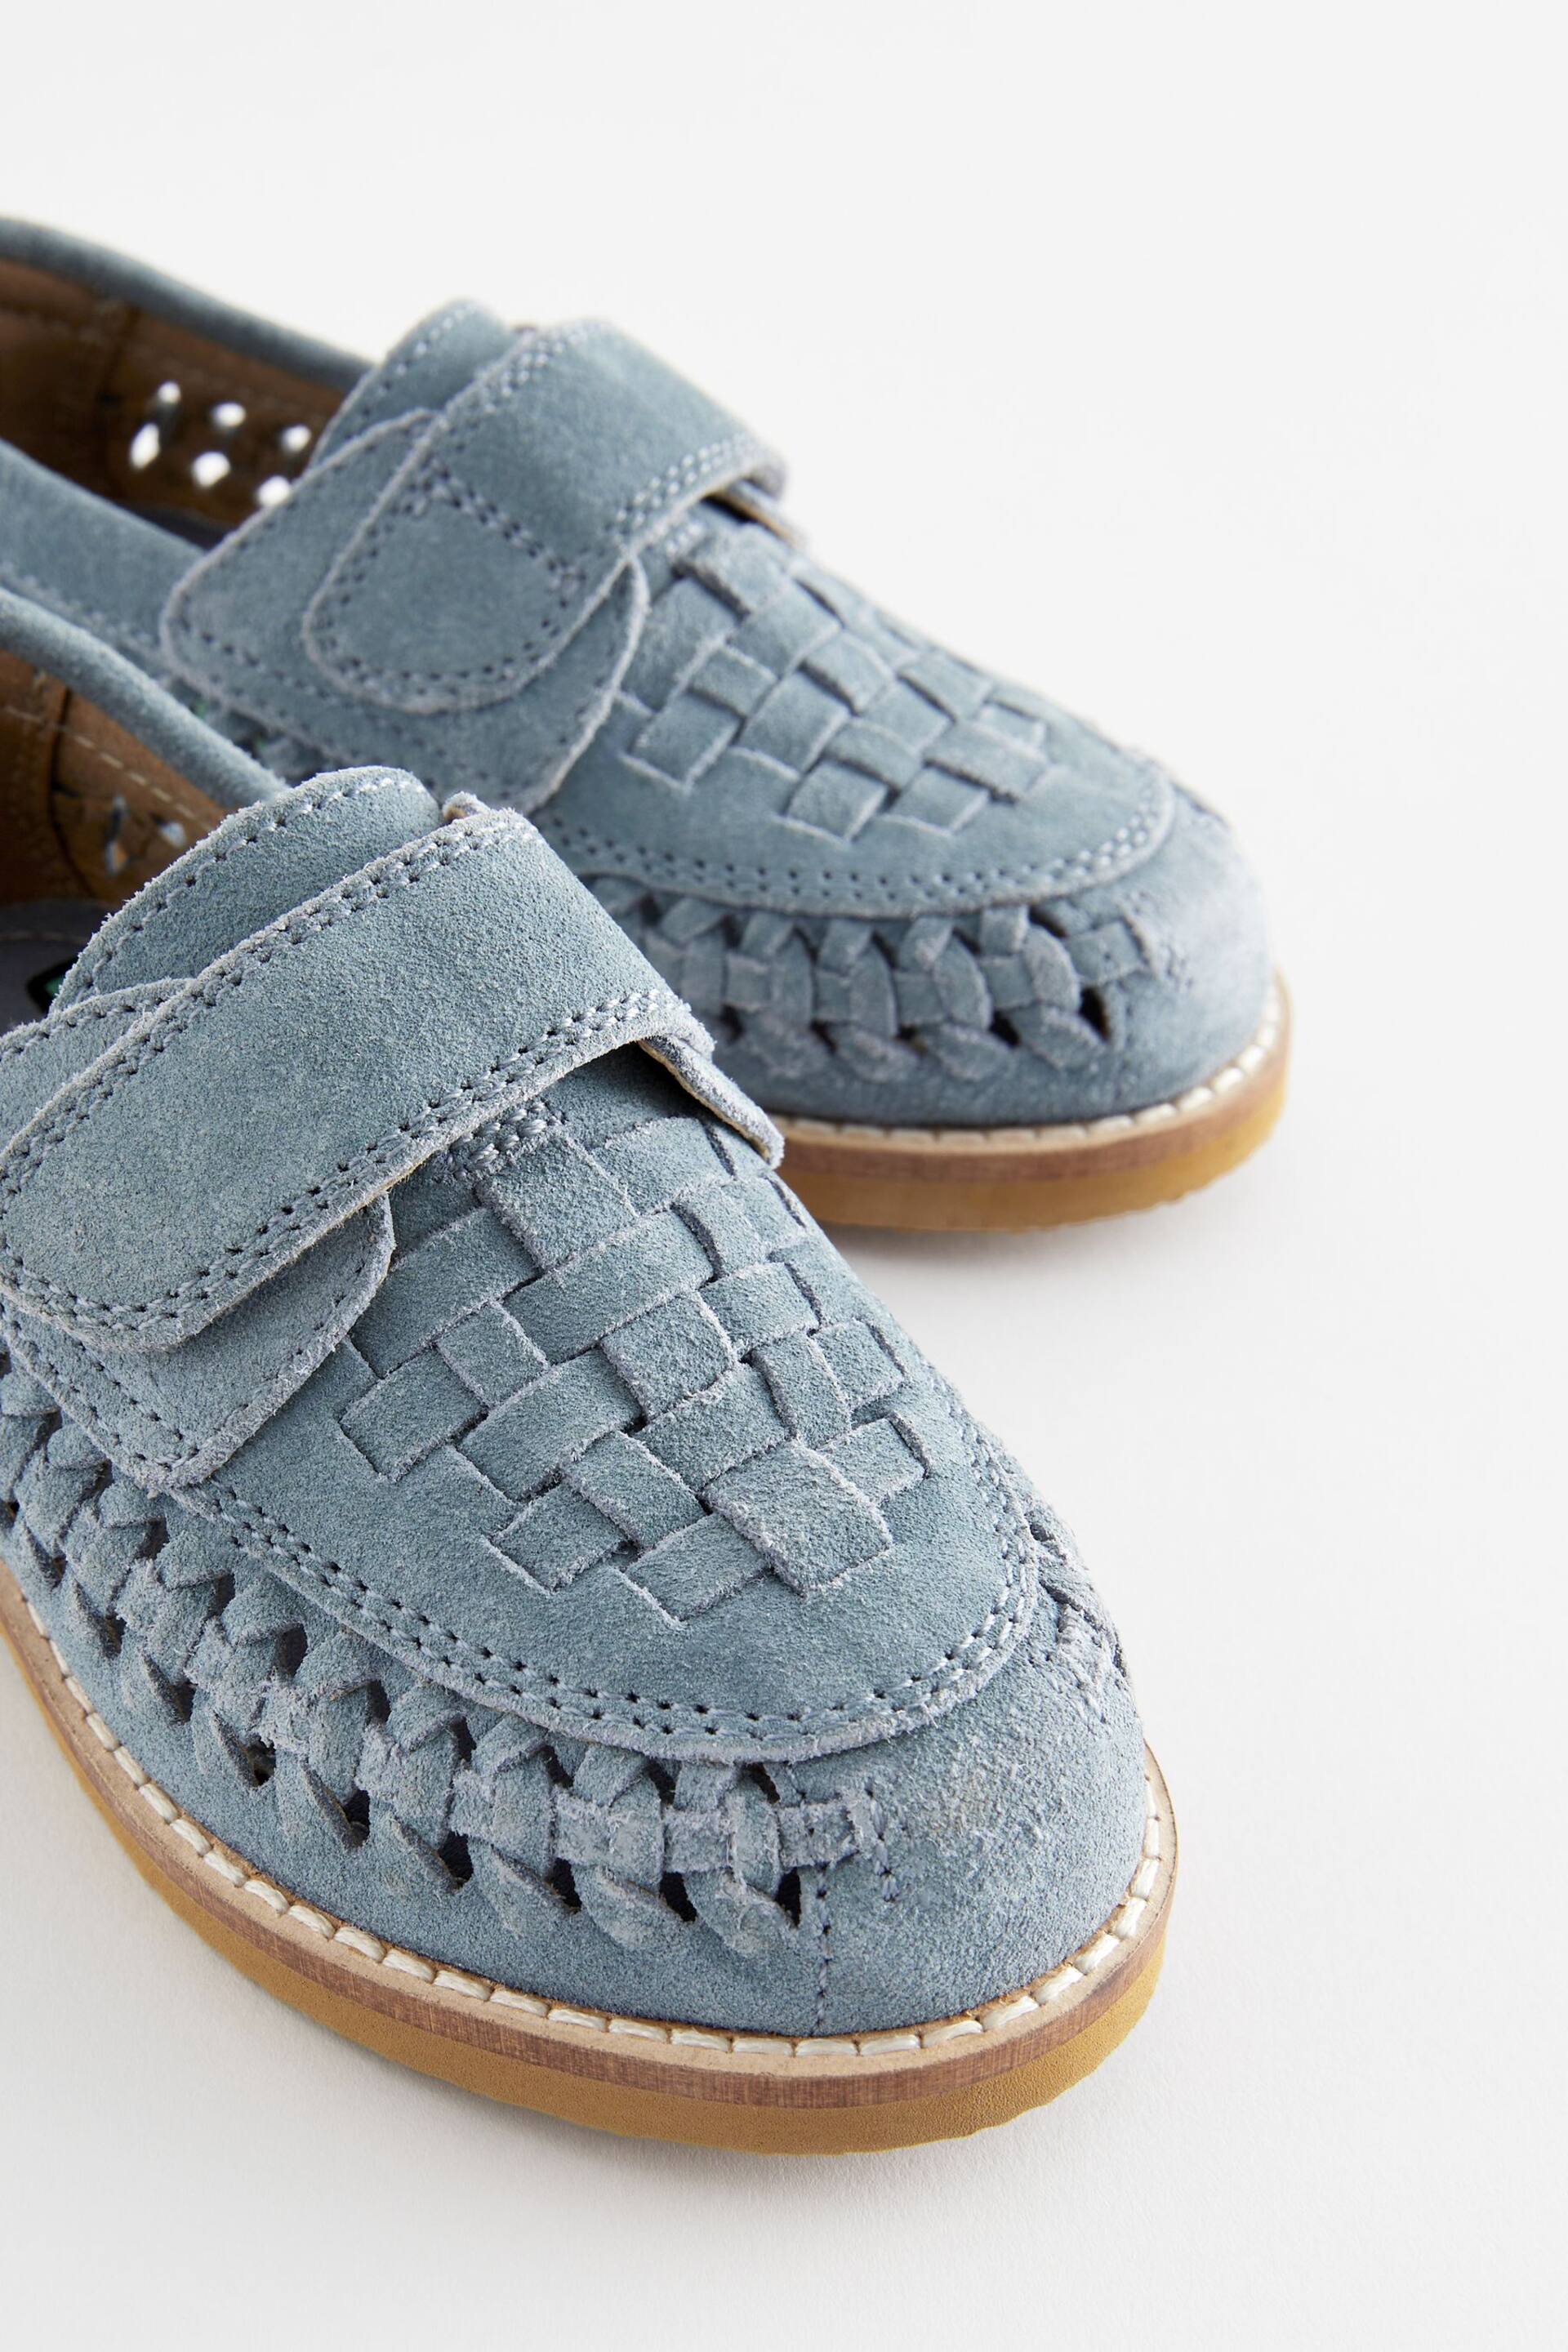 Blue Woven Loafers - Image 3 of 5